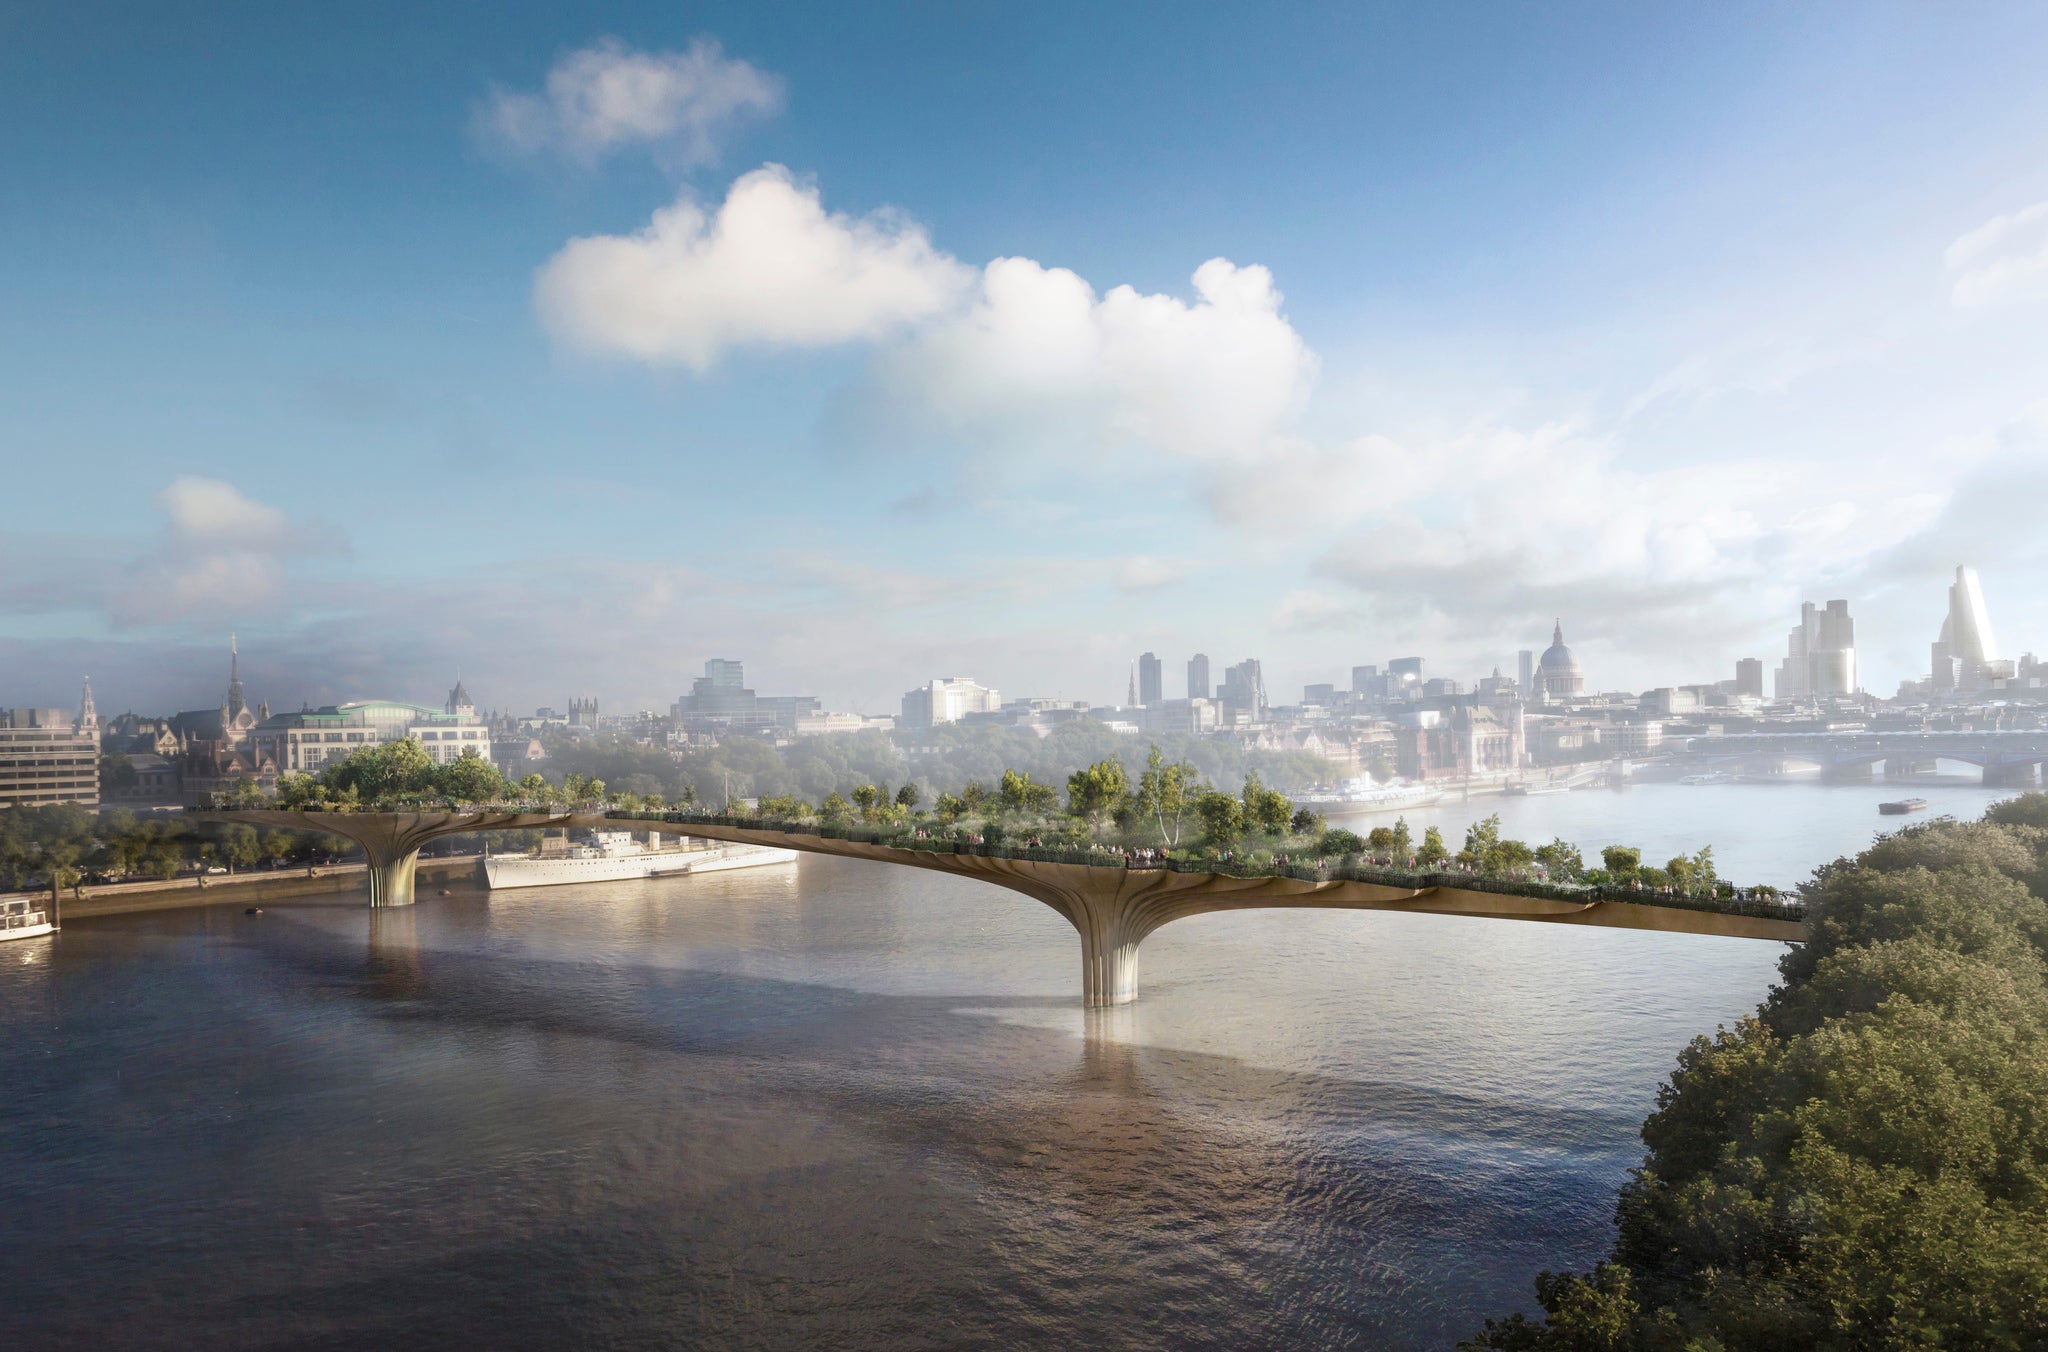 Digital rendering of the now axed project, which has cost tens of millions of public money